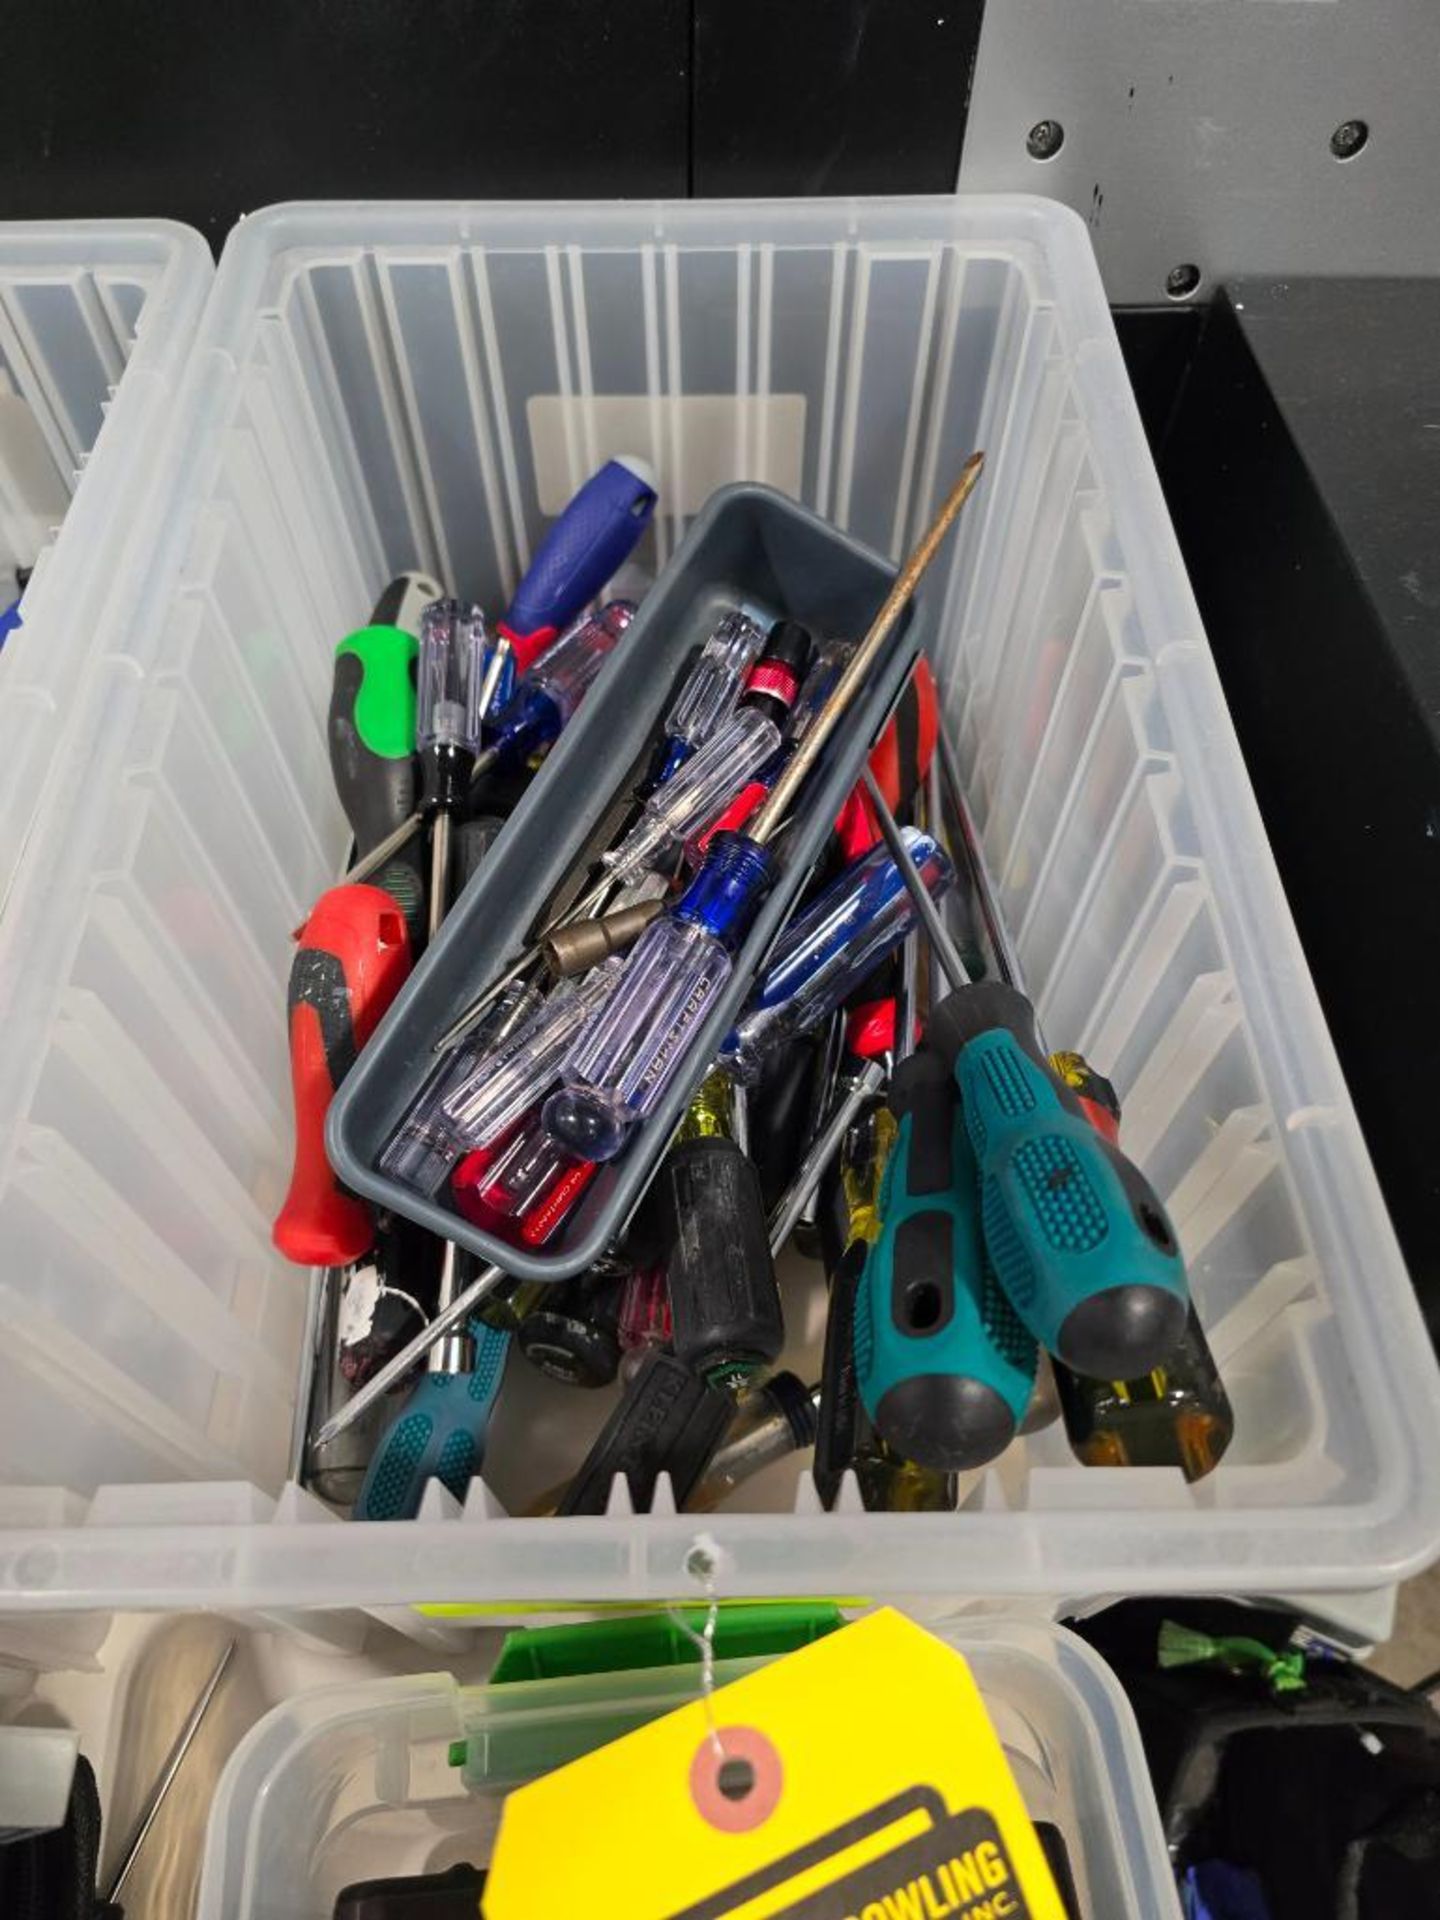 Tote of Screw Drivers & Nut Drivers